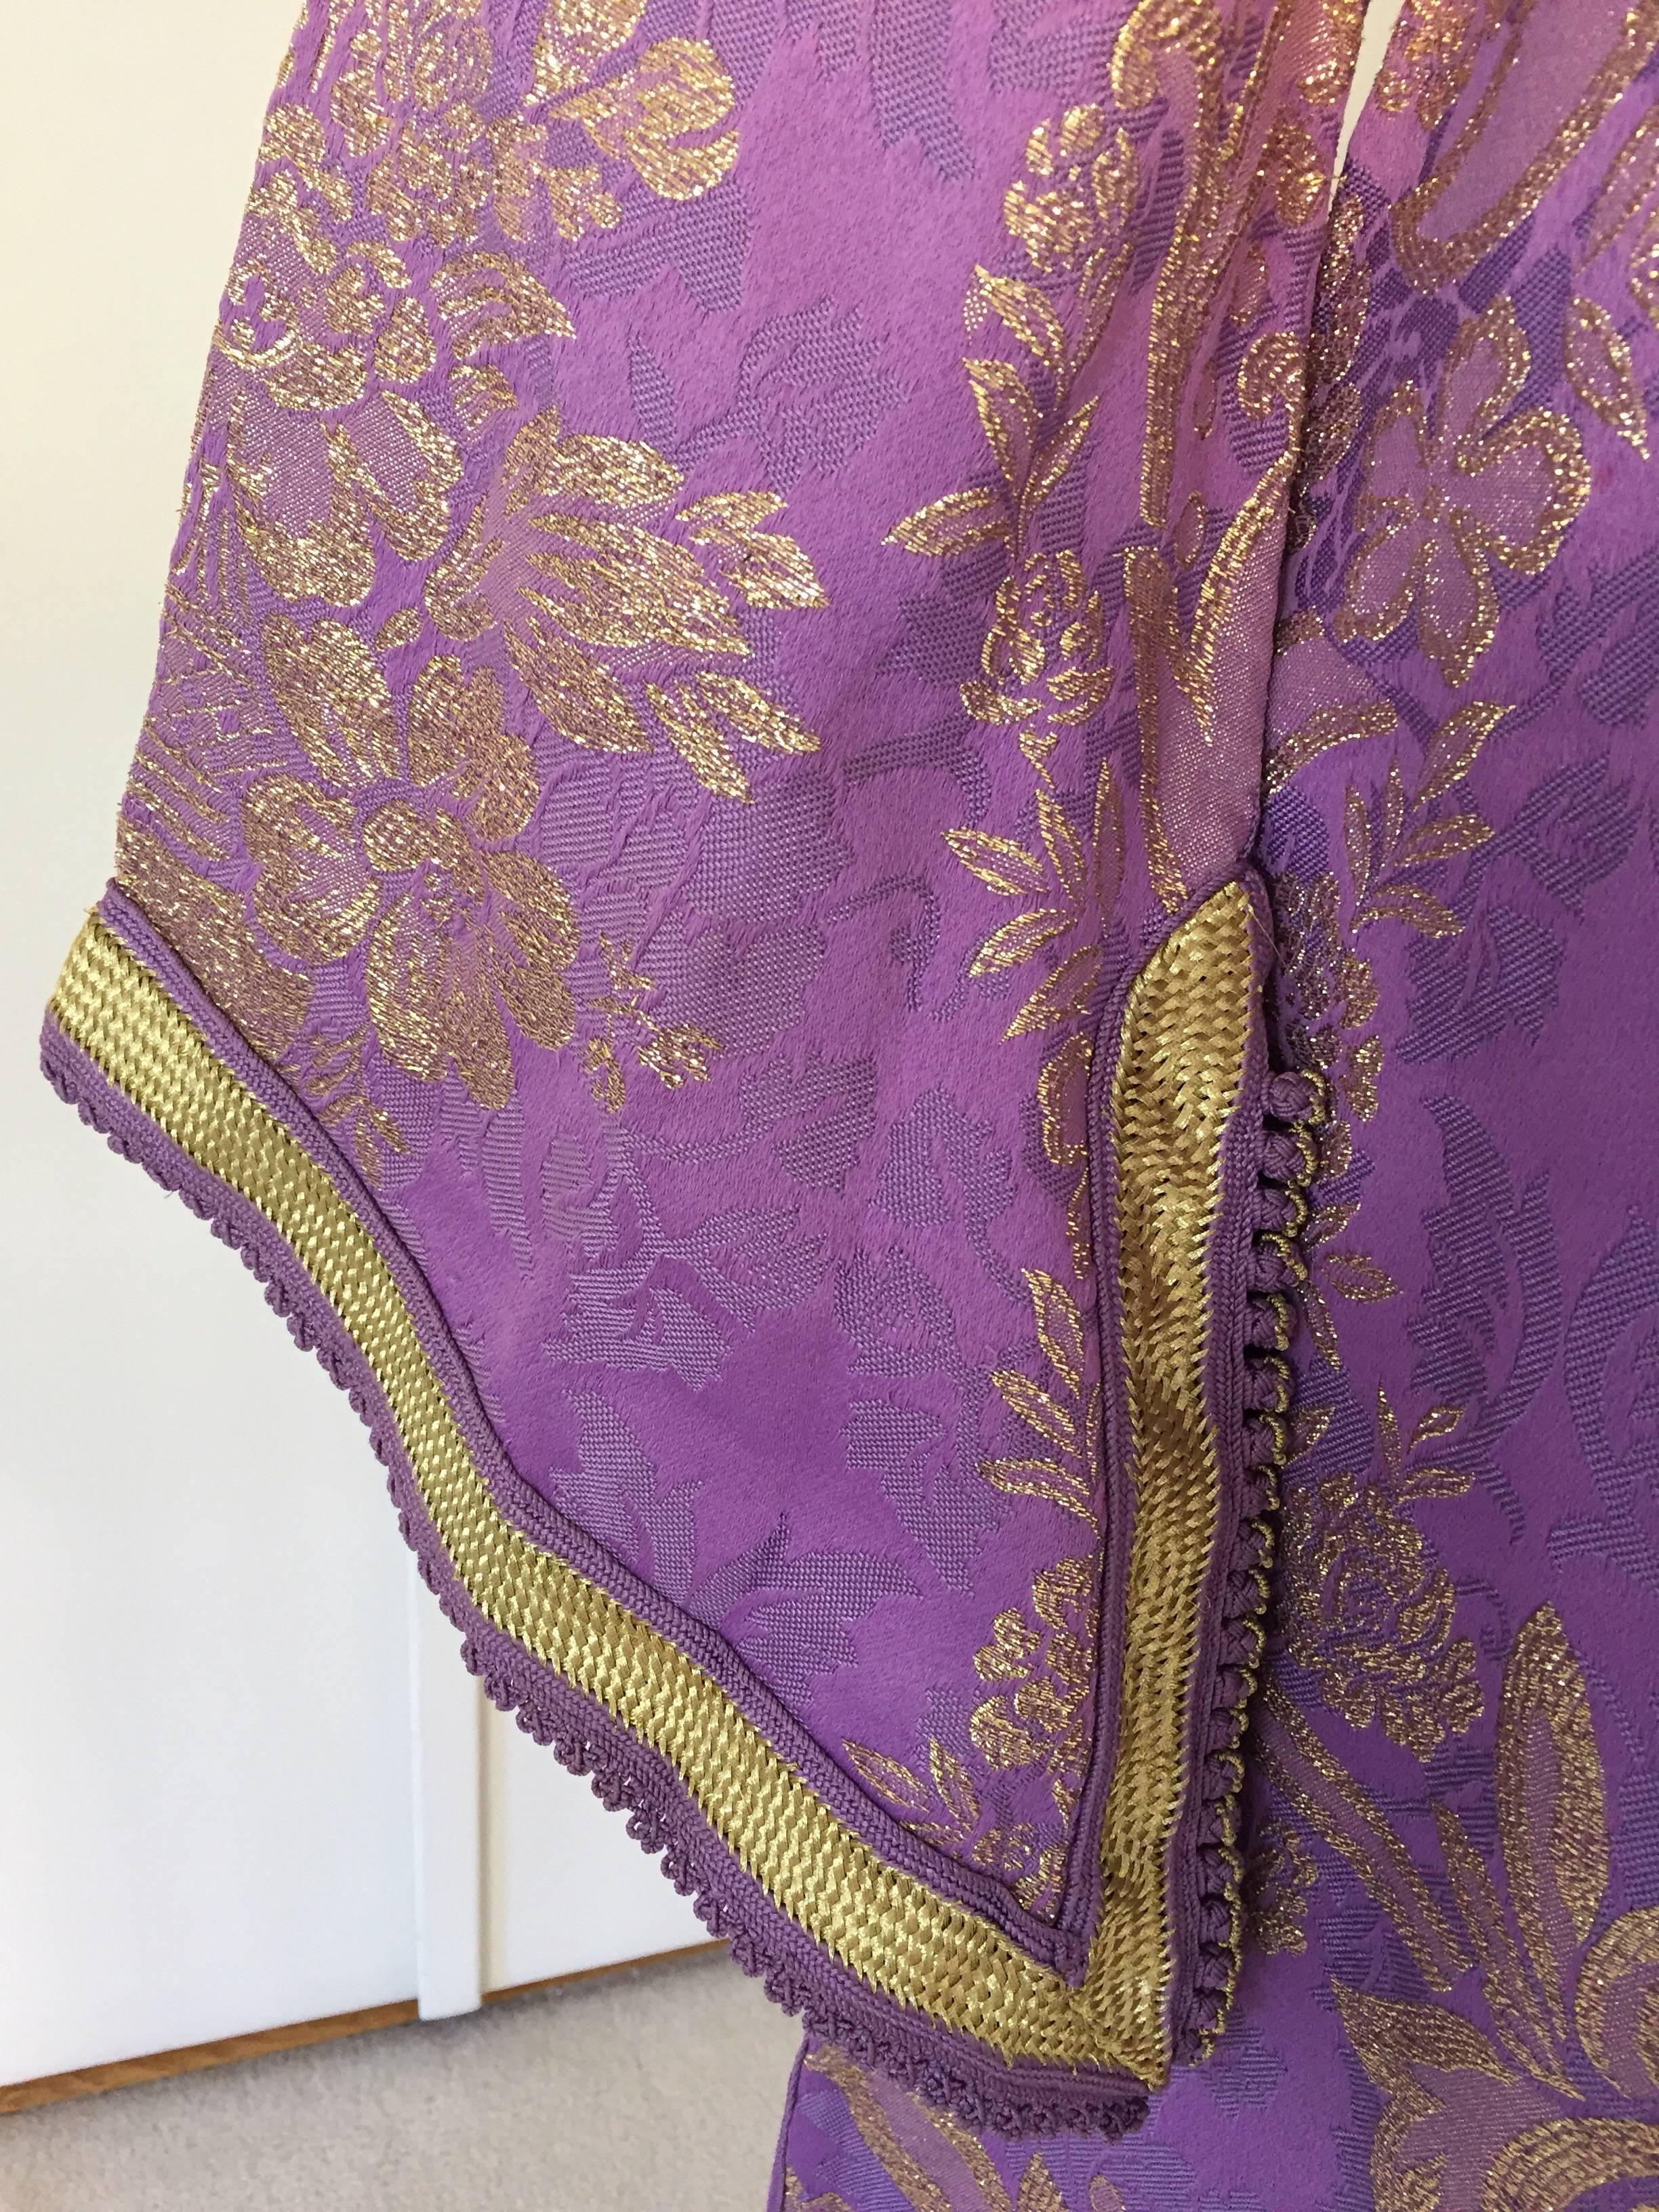 Hand-Crafted Lavender and Gold Brocade 1970s Maxi Dress Caftan, Evening Gown Kaftan